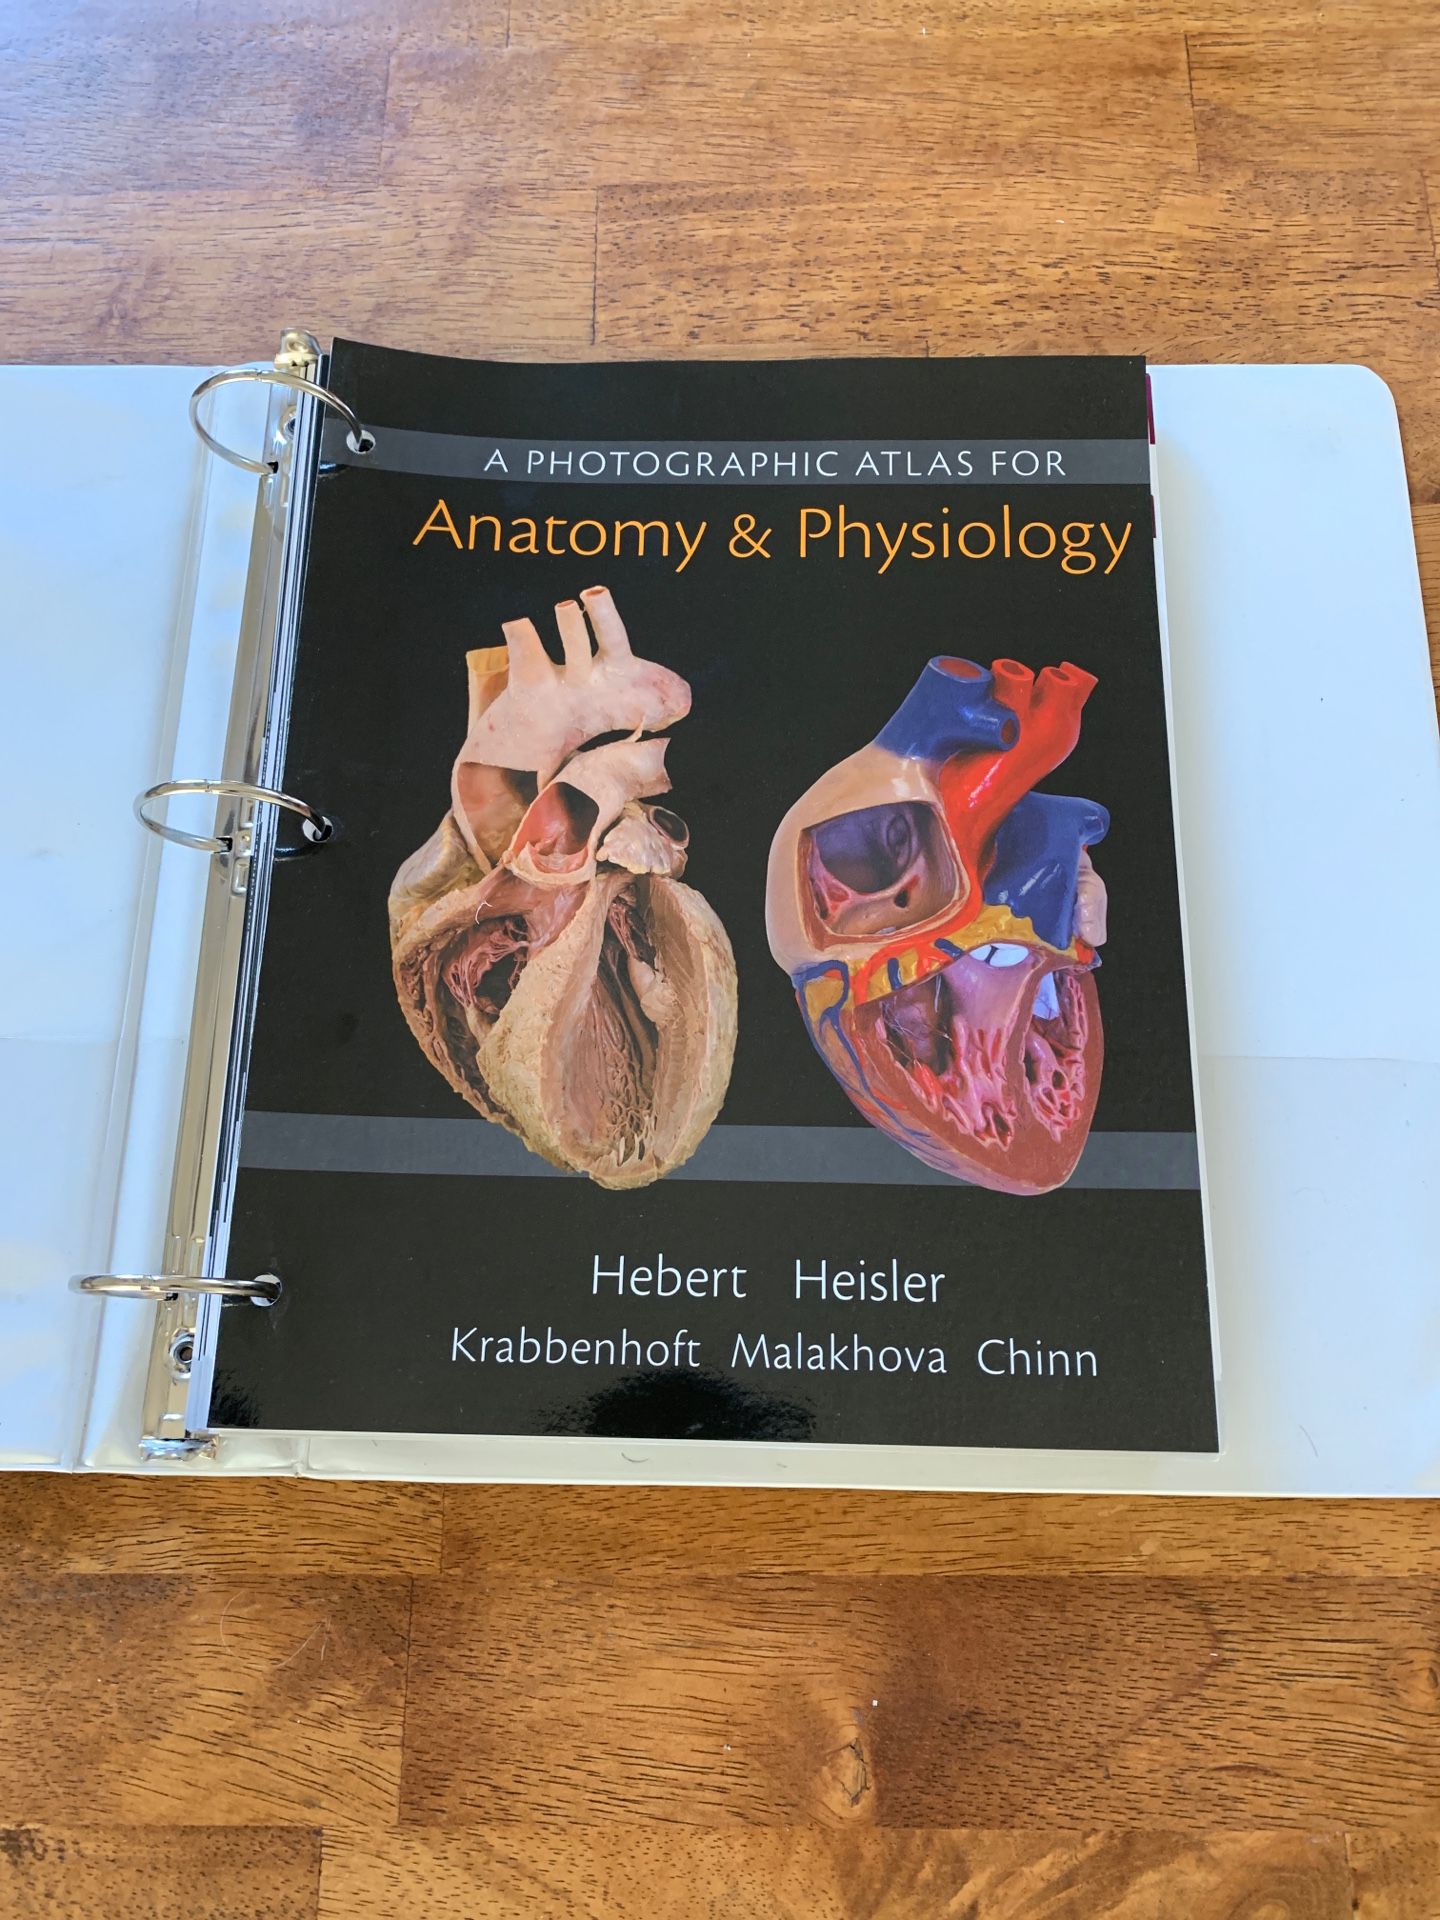 A Photographic Atlas For Anatomy & Physiology